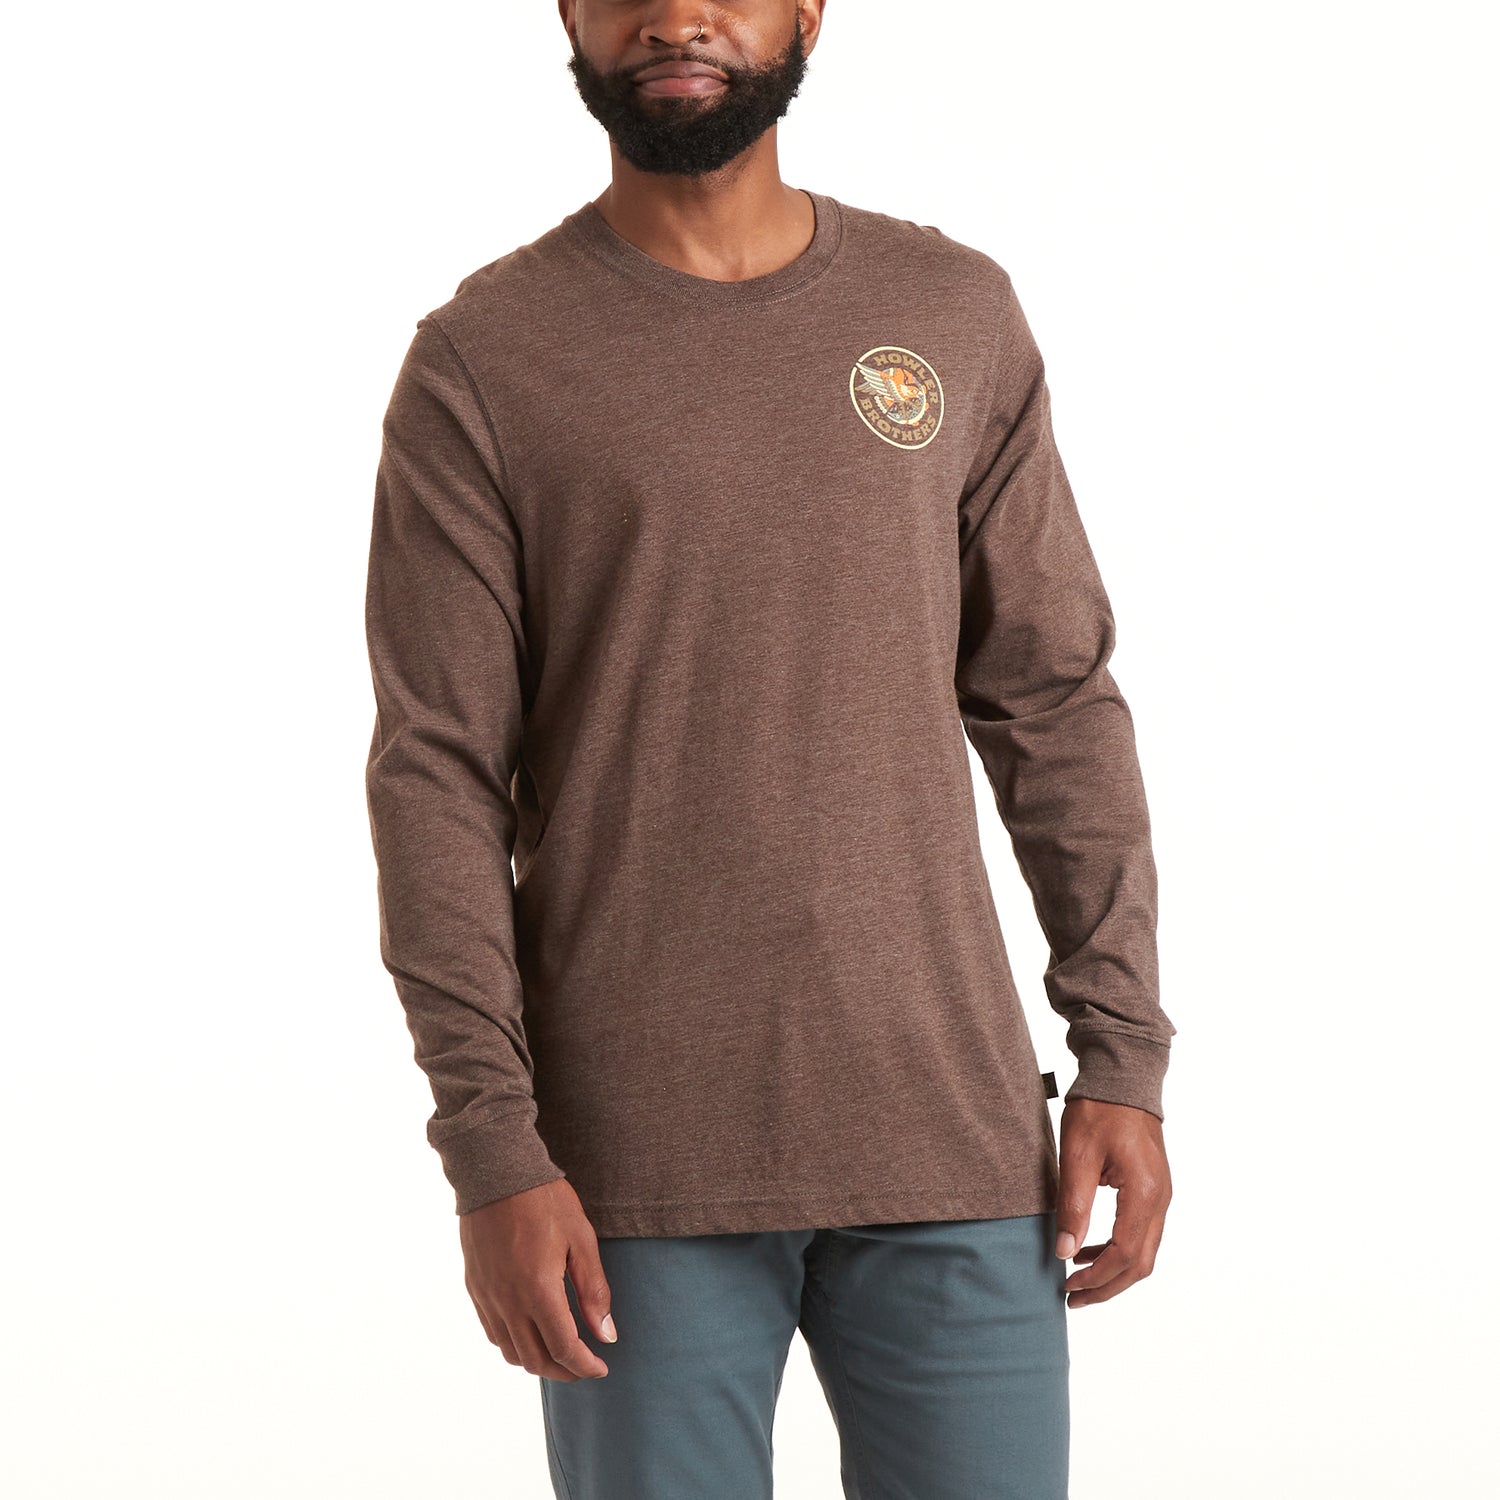 Osprey and Pike Select Longsleeve T-Shirt – HOWLER BROTHERS